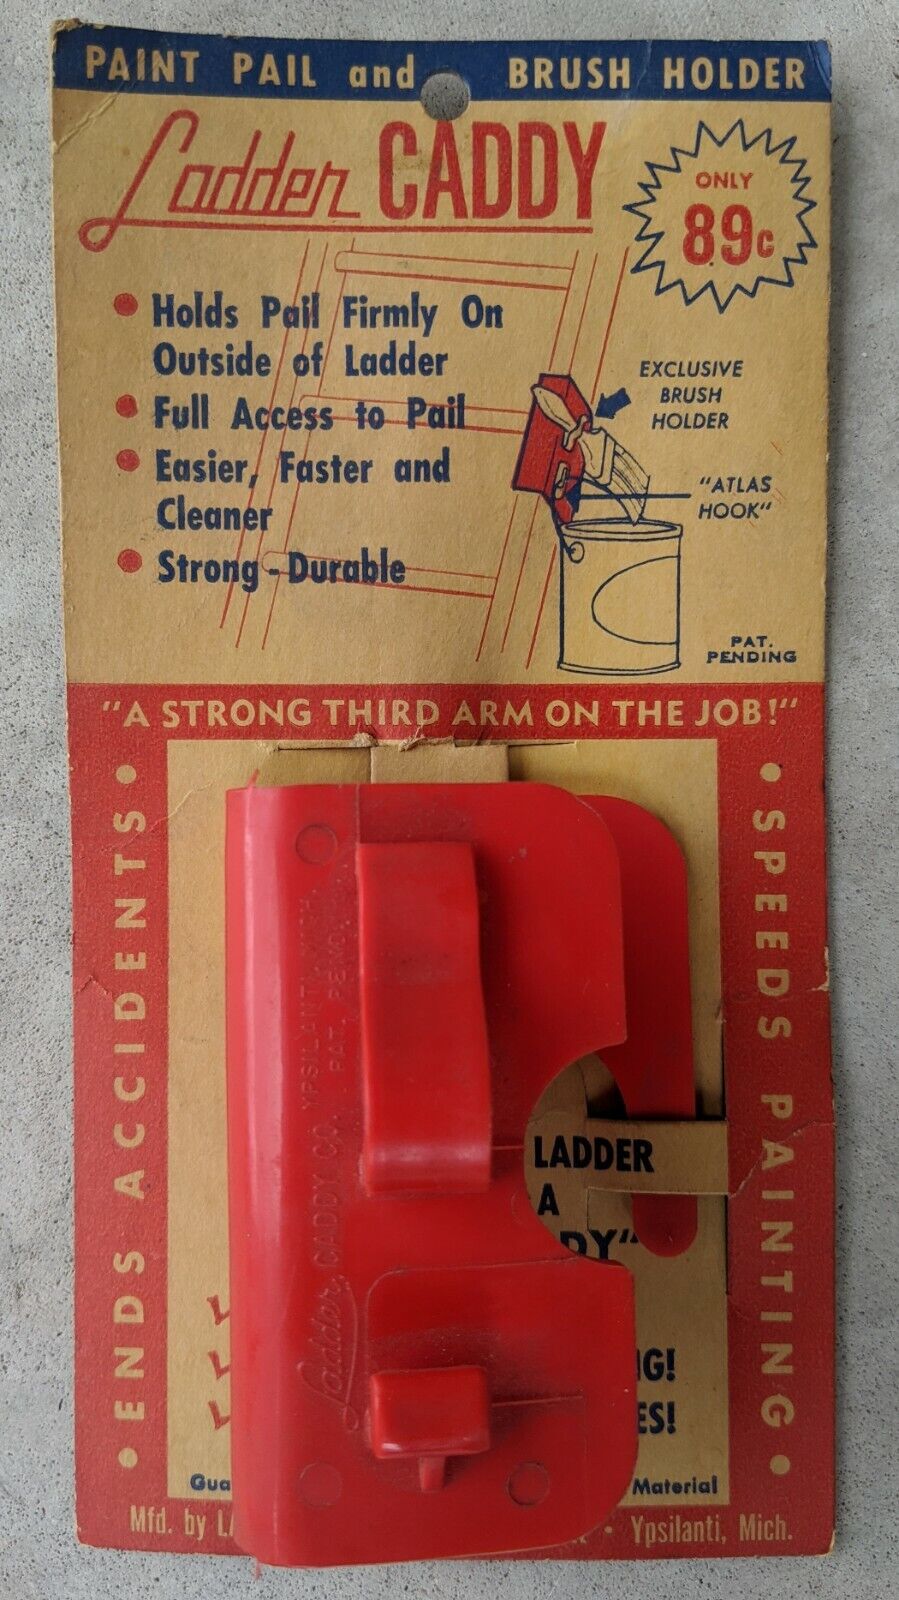 Vintage New NOS Ladder Caddy Co. Paint Can & Brush Holder Plastic Ypsilanti, MI